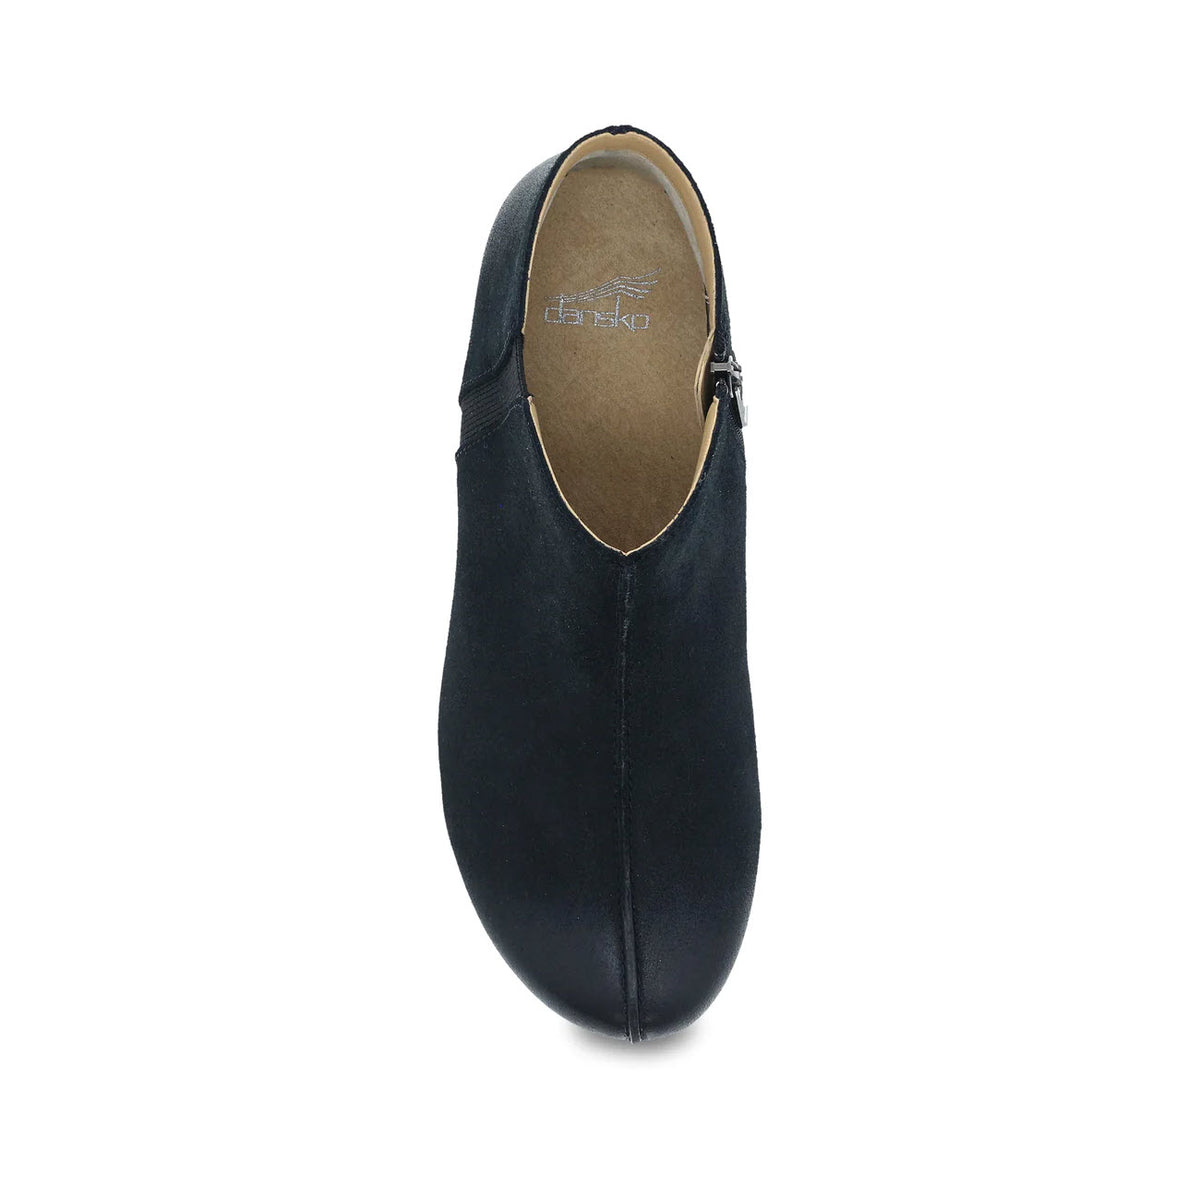 A single black suede Dansko Makara bootie with an elastic side panel and a low heel, viewed from the top front angle.